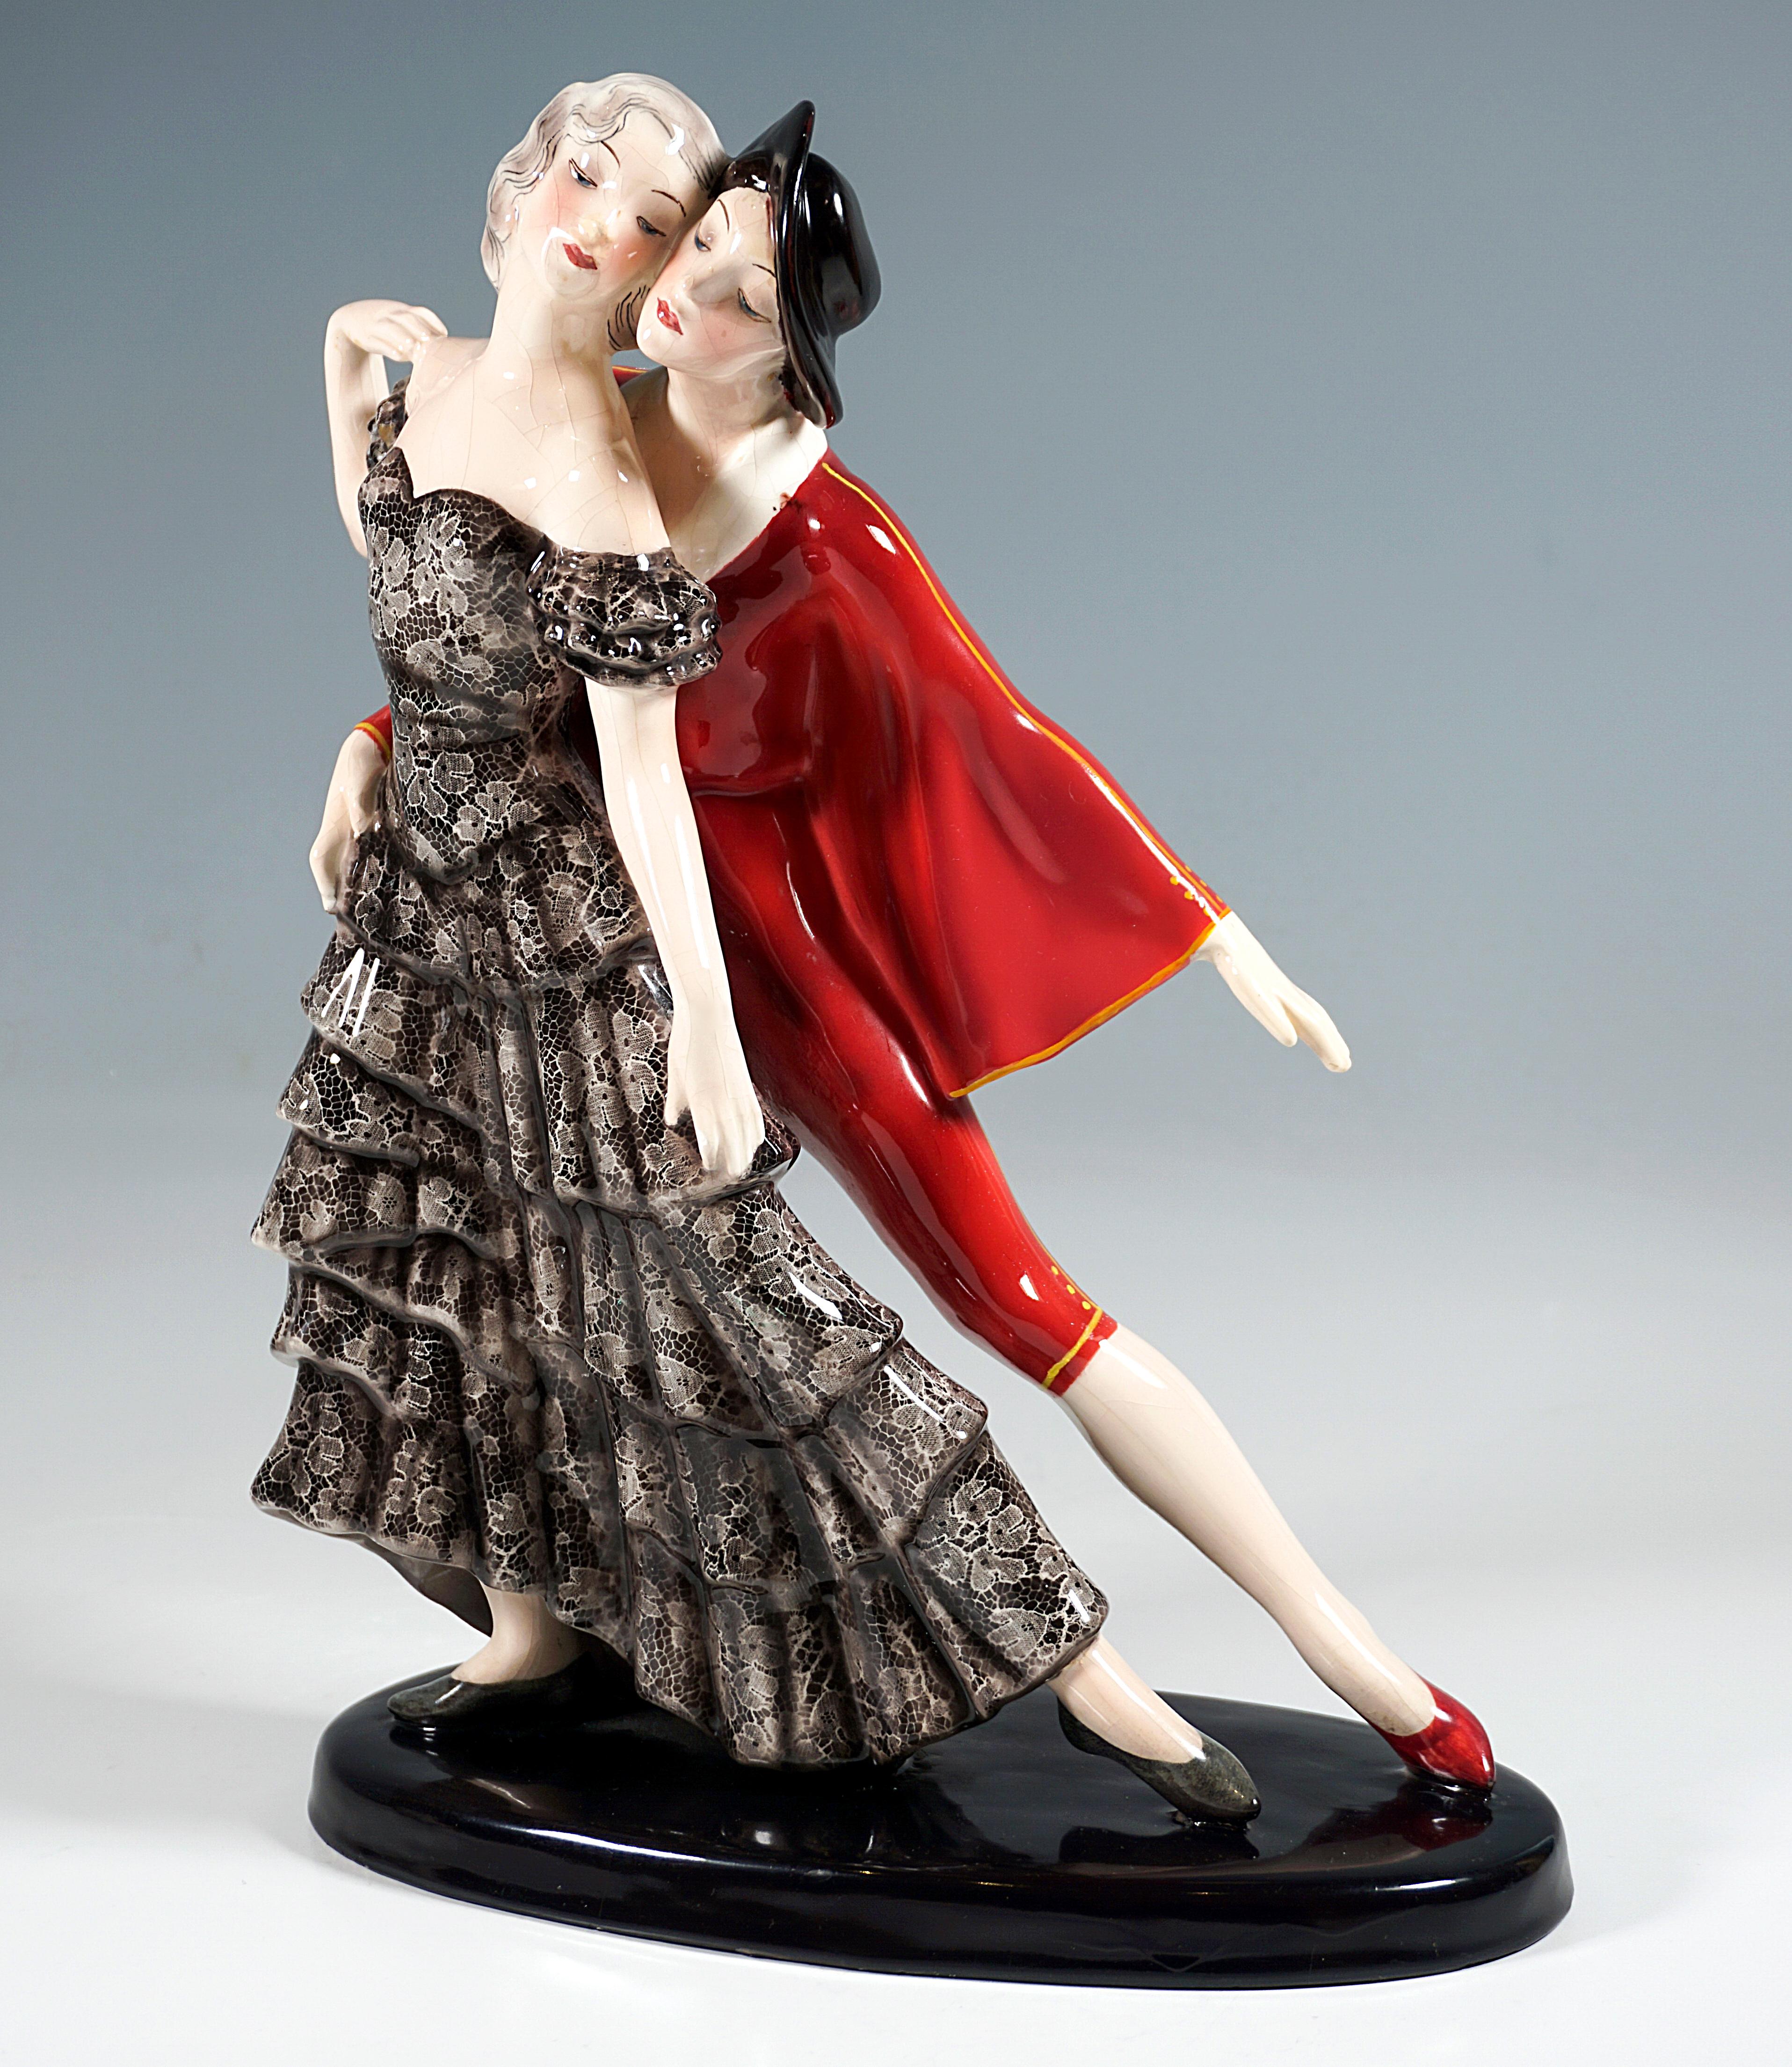 Hand-Crafted Goldscheider Vienna Art Deco Group, Russian Ballet, by Claire Weiss, ca 1934 For Sale